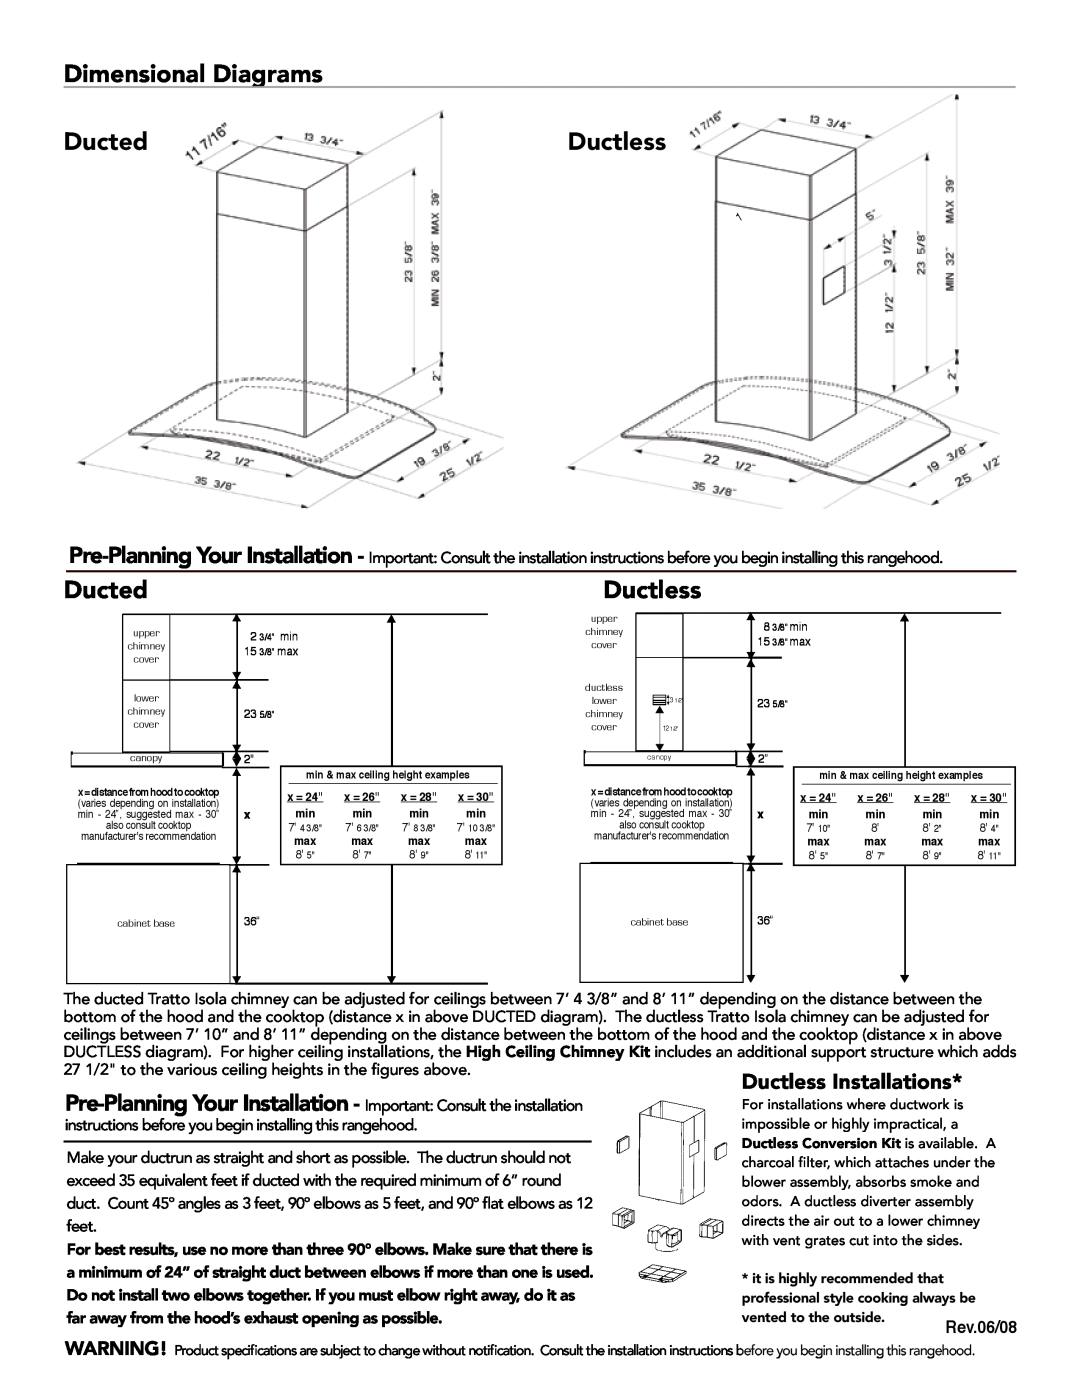 Faber 630003949 manual Ductless, Dimensional Diagrams, Ducted, Rev.06/08 